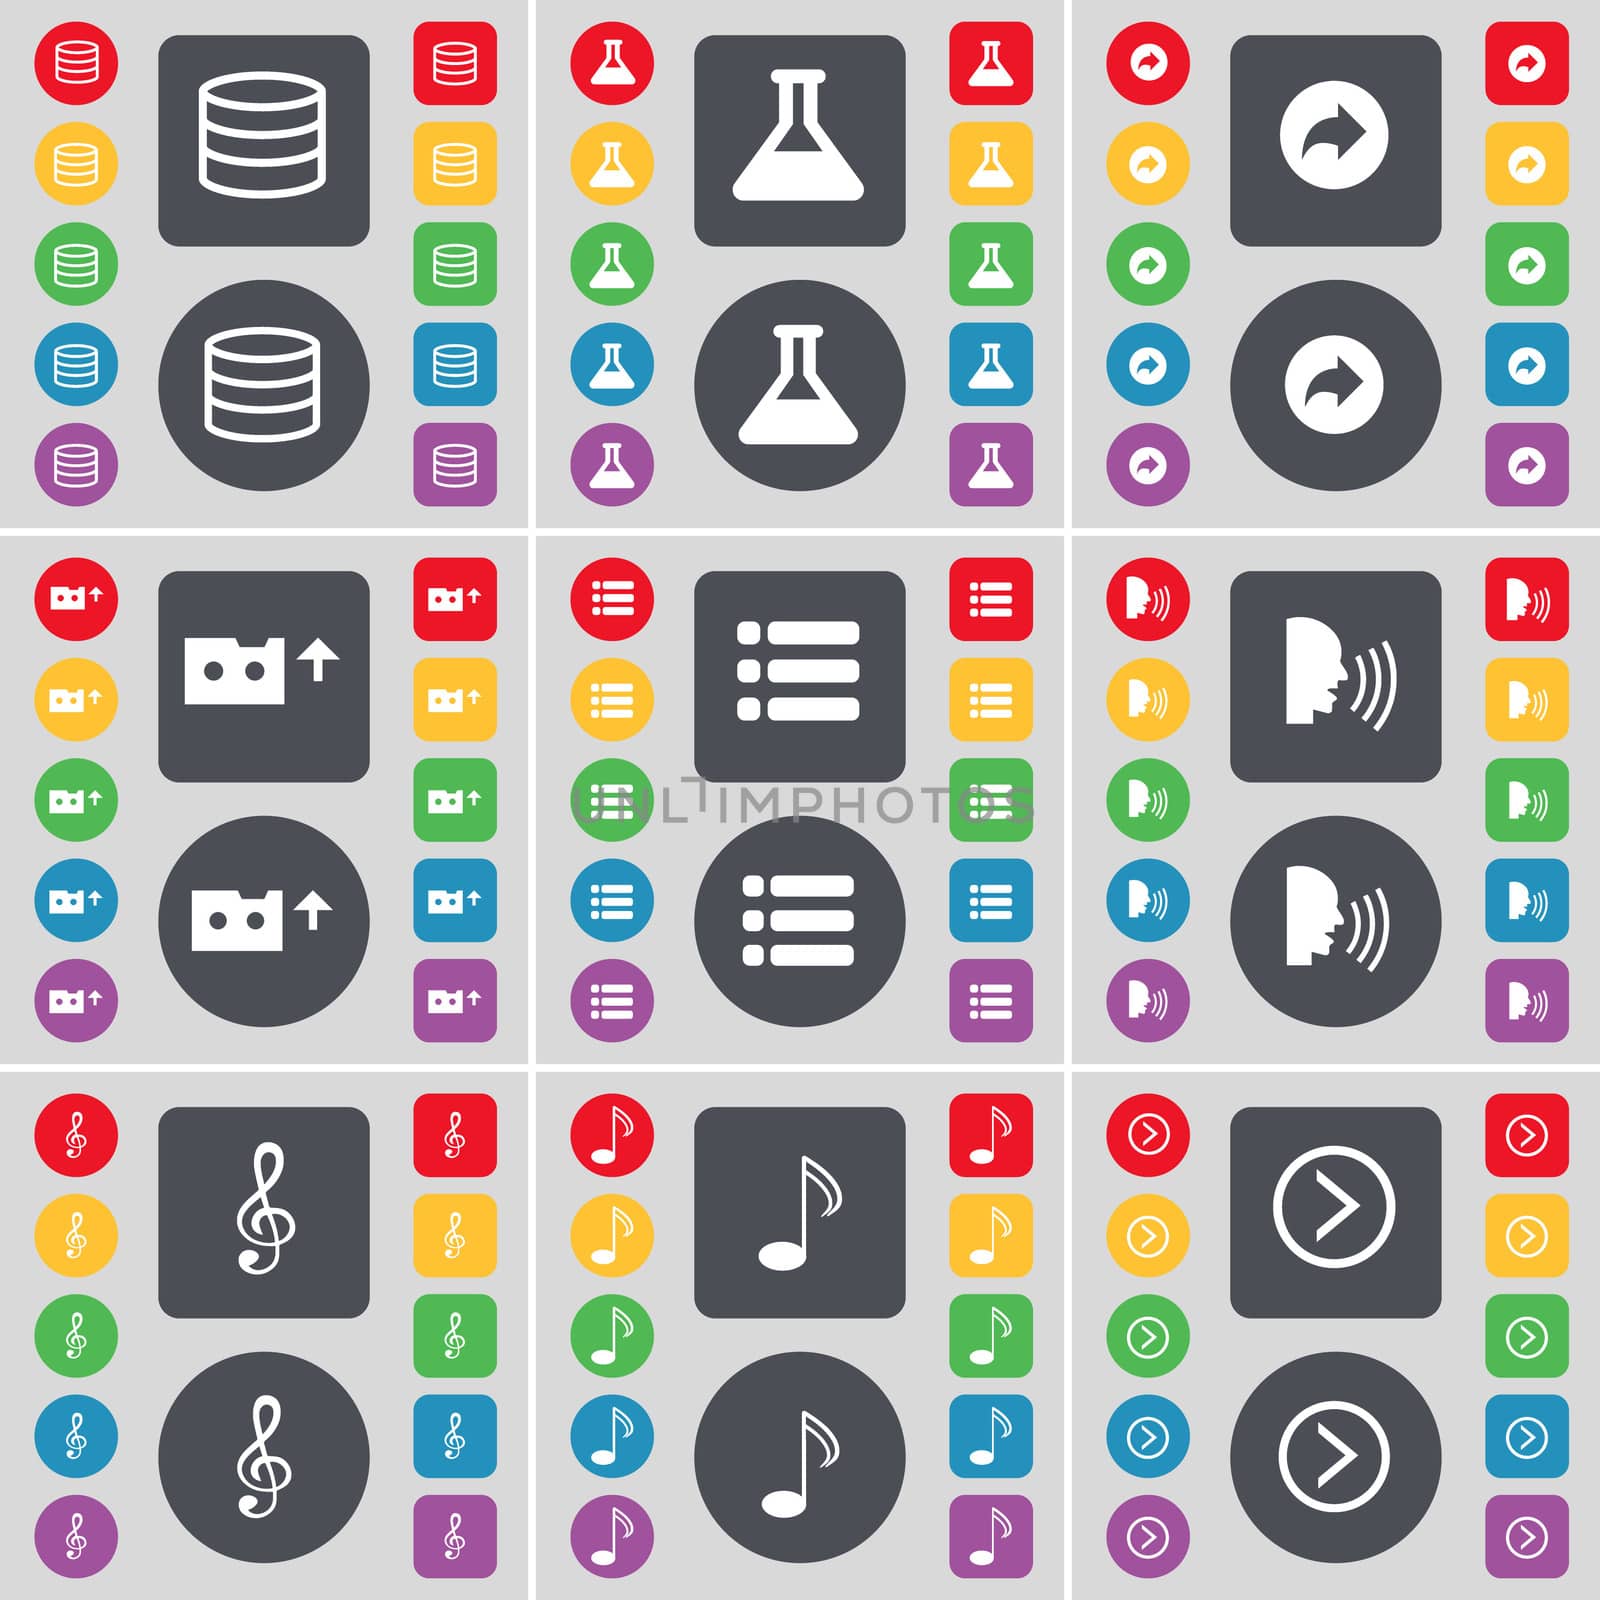 Database, Flask, Back, Cassette, List, Talk, Clef, Note, Arrow right icon symbol. A large set of flat, colored buttons for your design. illustration